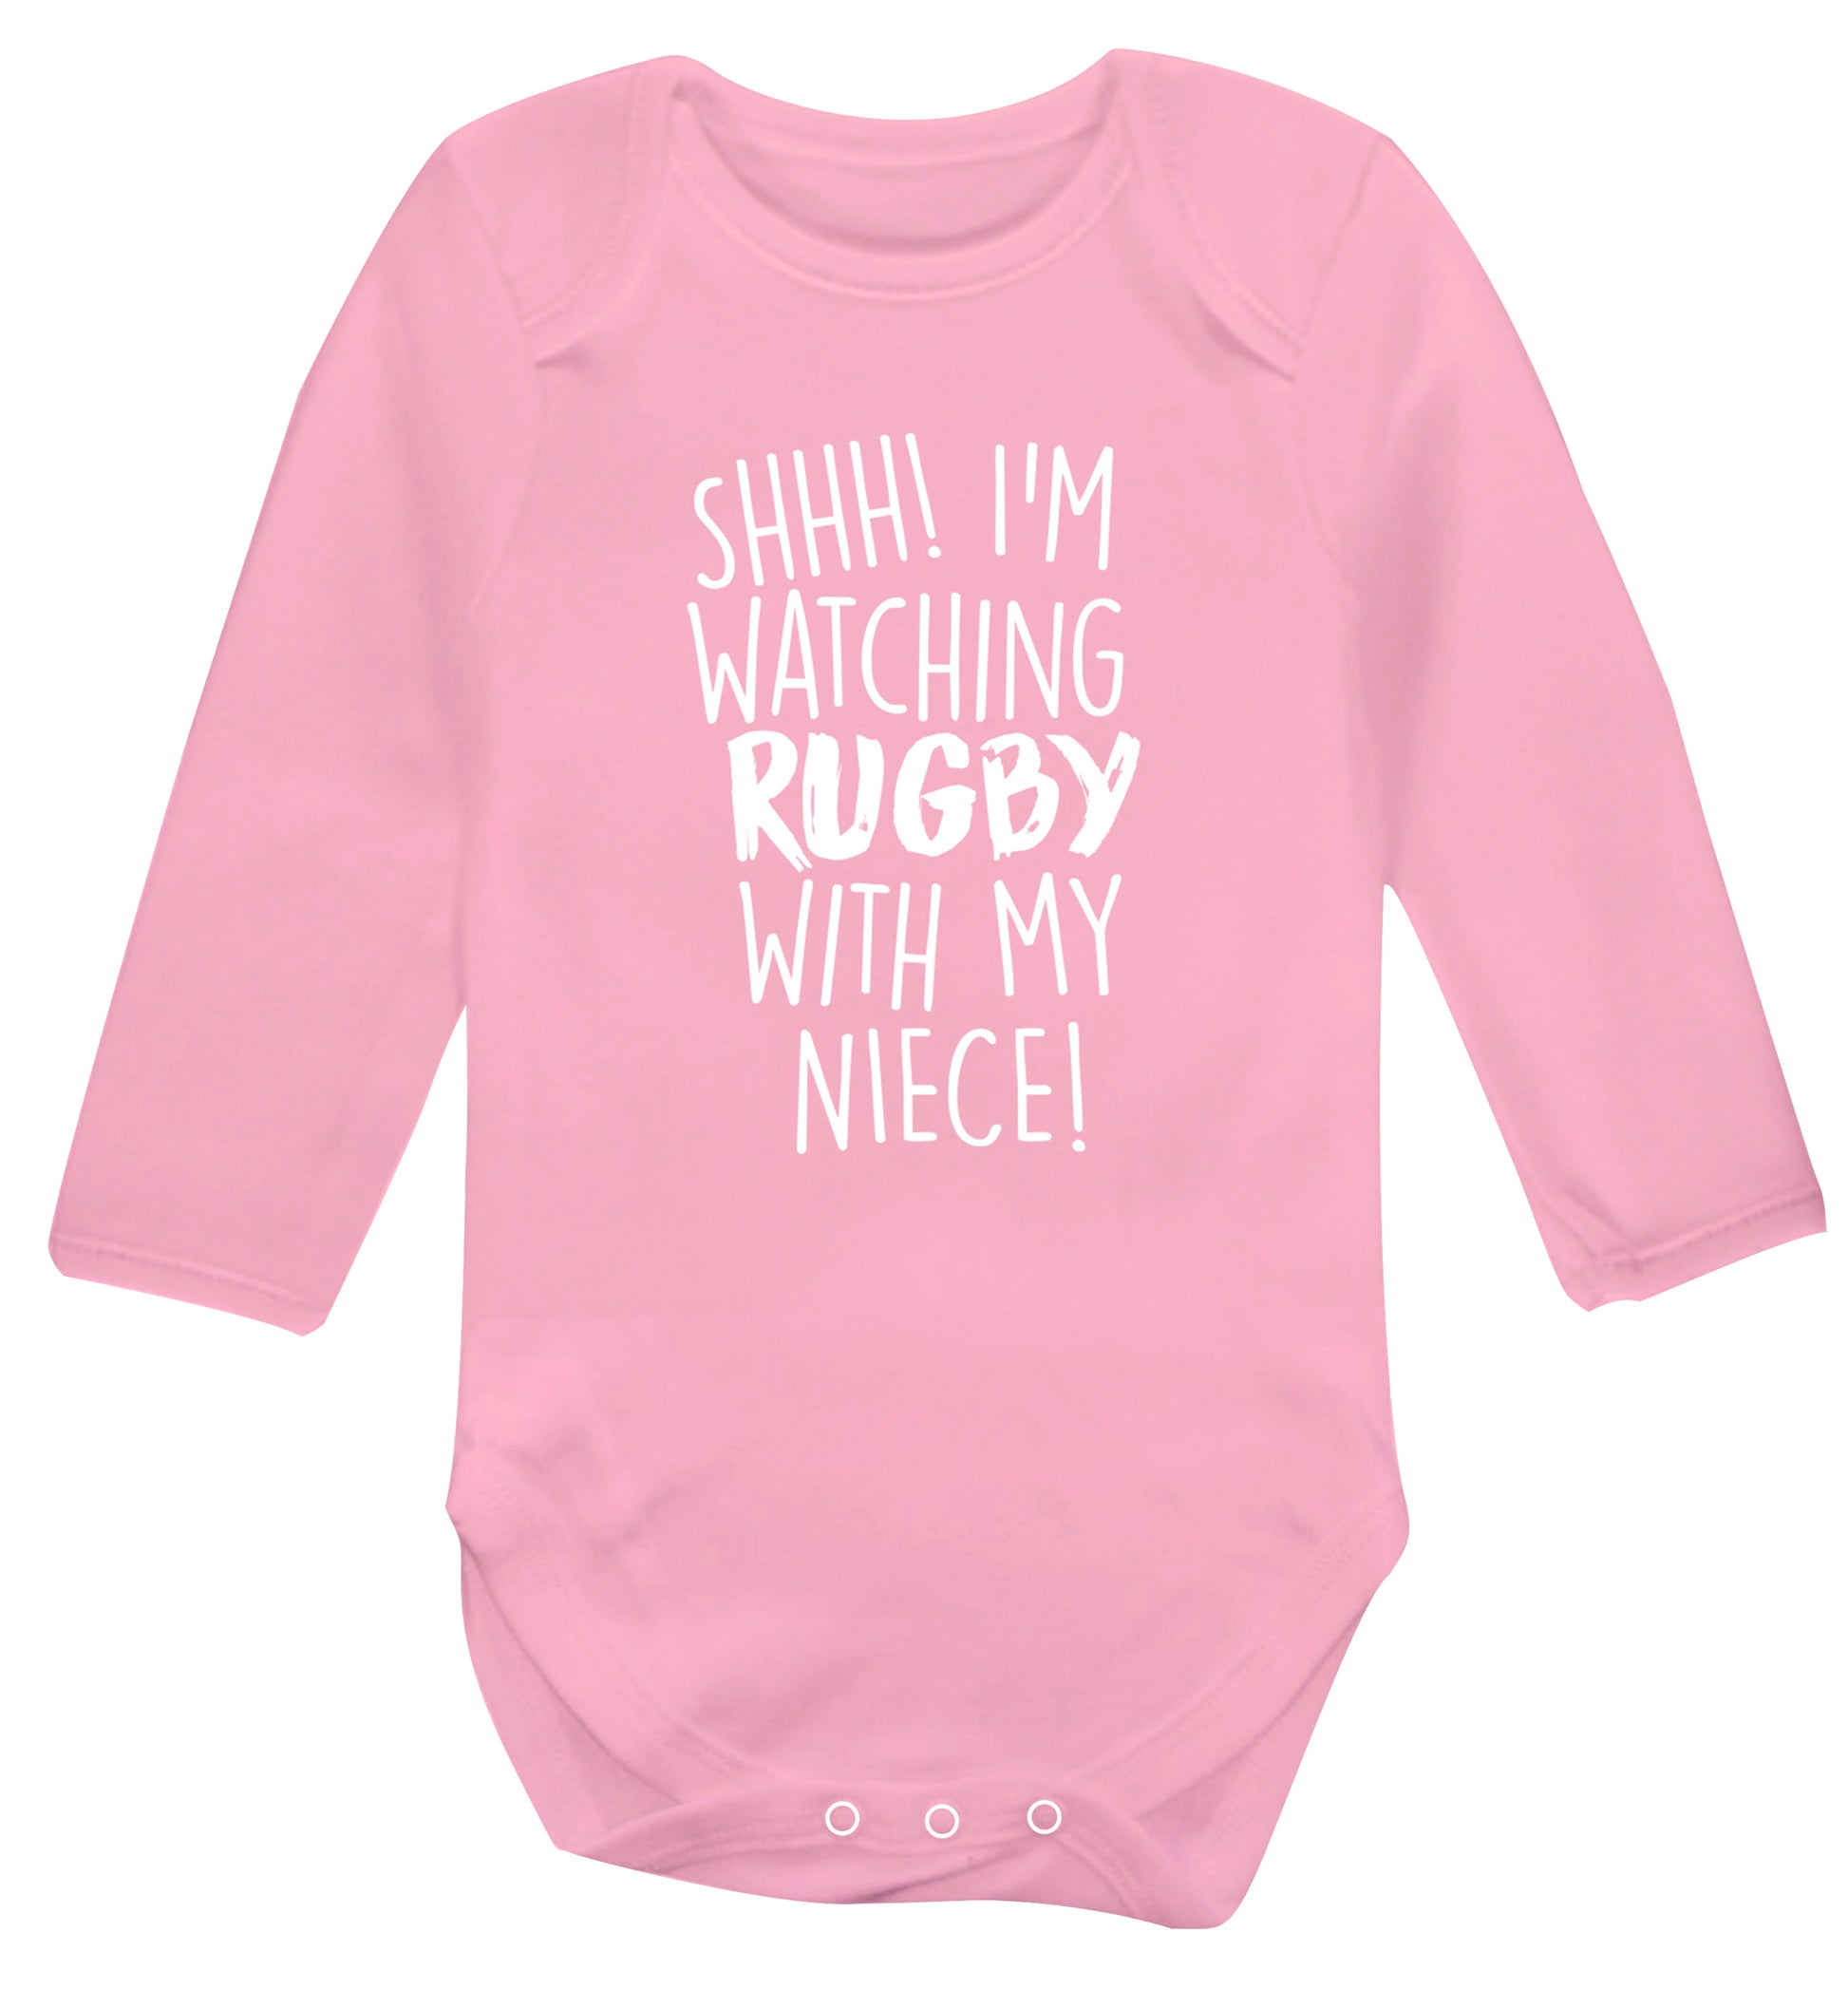 Shh.. I'm watching rugby with my niece Baby Vest long sleeved pale pink 6-12 months